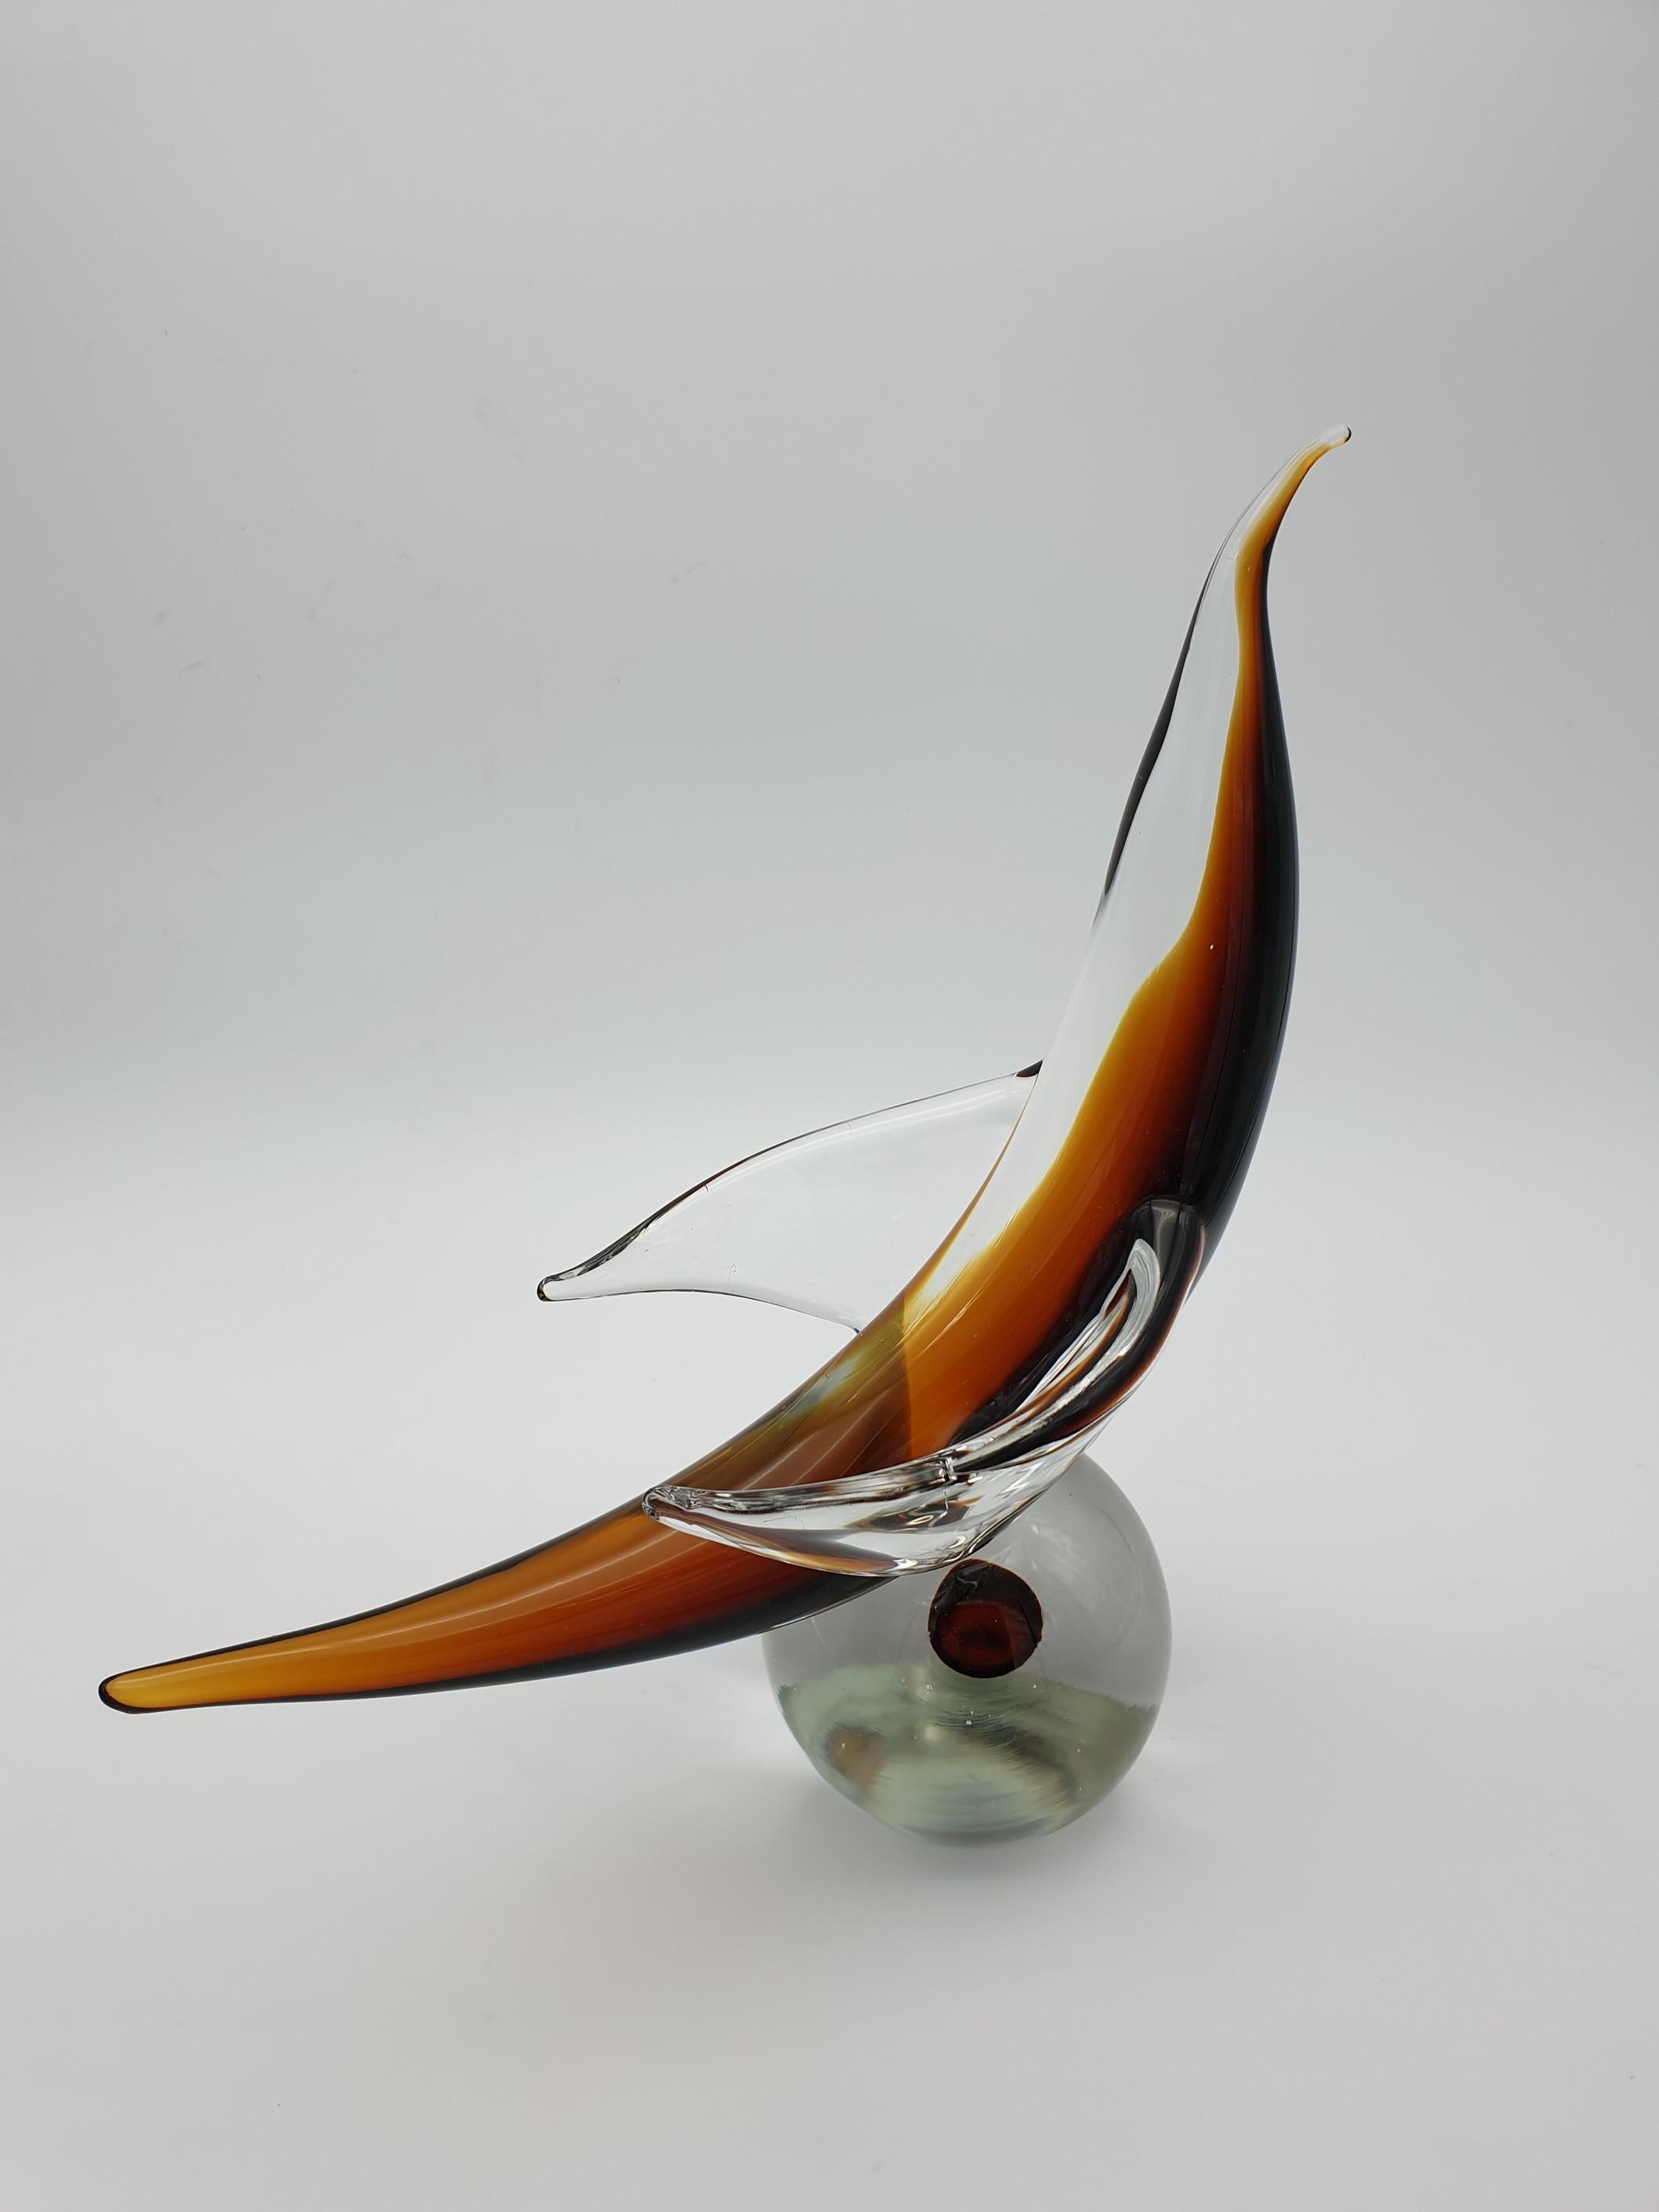 This unconventional/peculiar Murano glass sculpture was made by the glass factory Gino Cenedese e Figlio in the island of Murano and symbolizes a bird ready to take off. The tapered shape is made of clear glass with amber-colored touches, and it